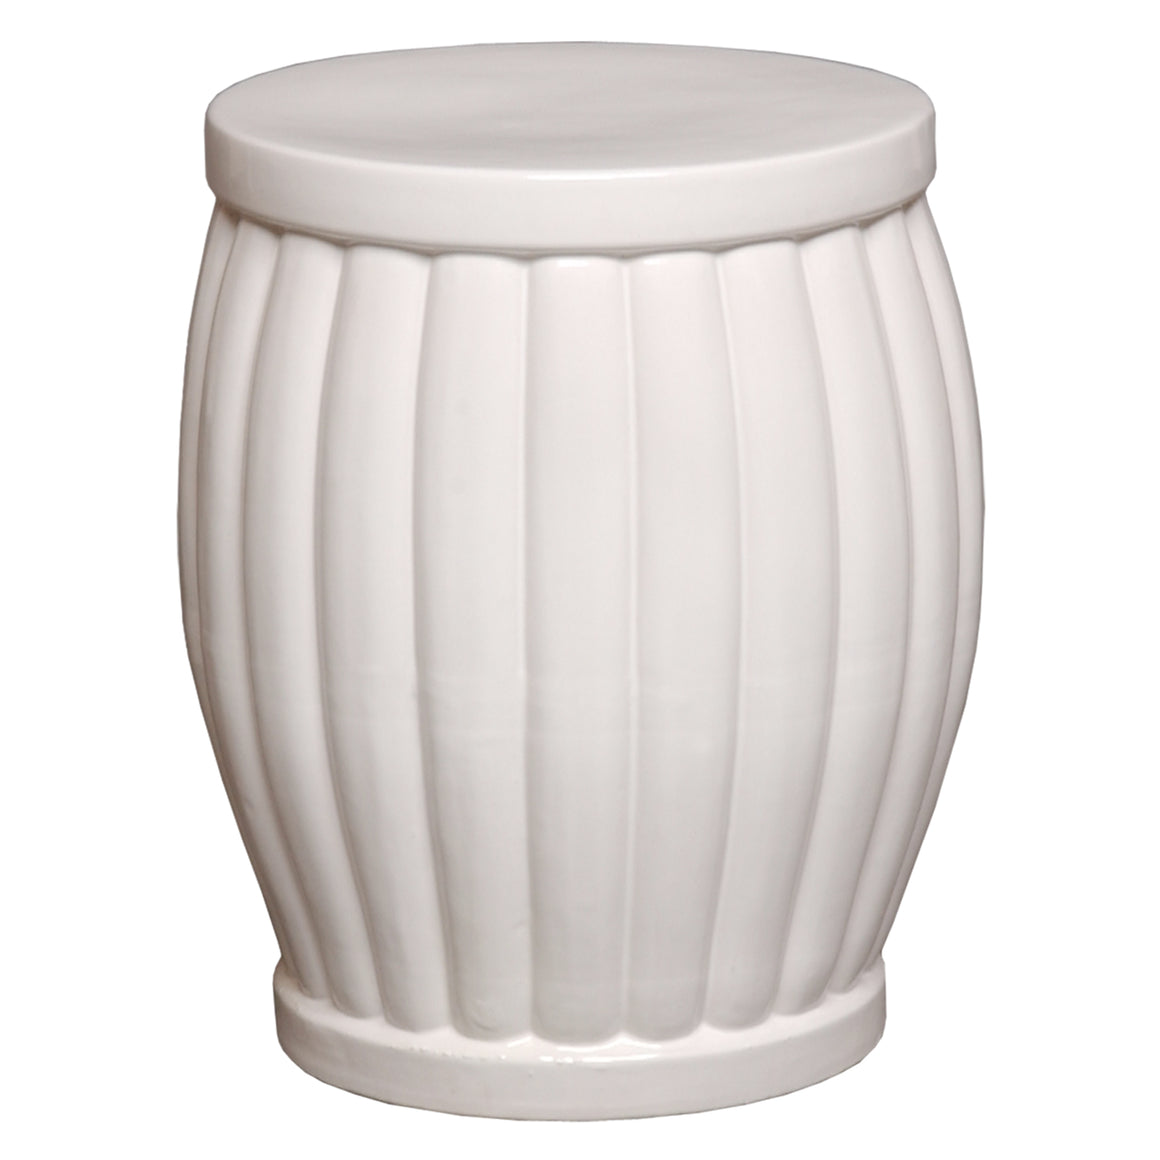 Large Fluted Garden Stool/Table with a White Glaze